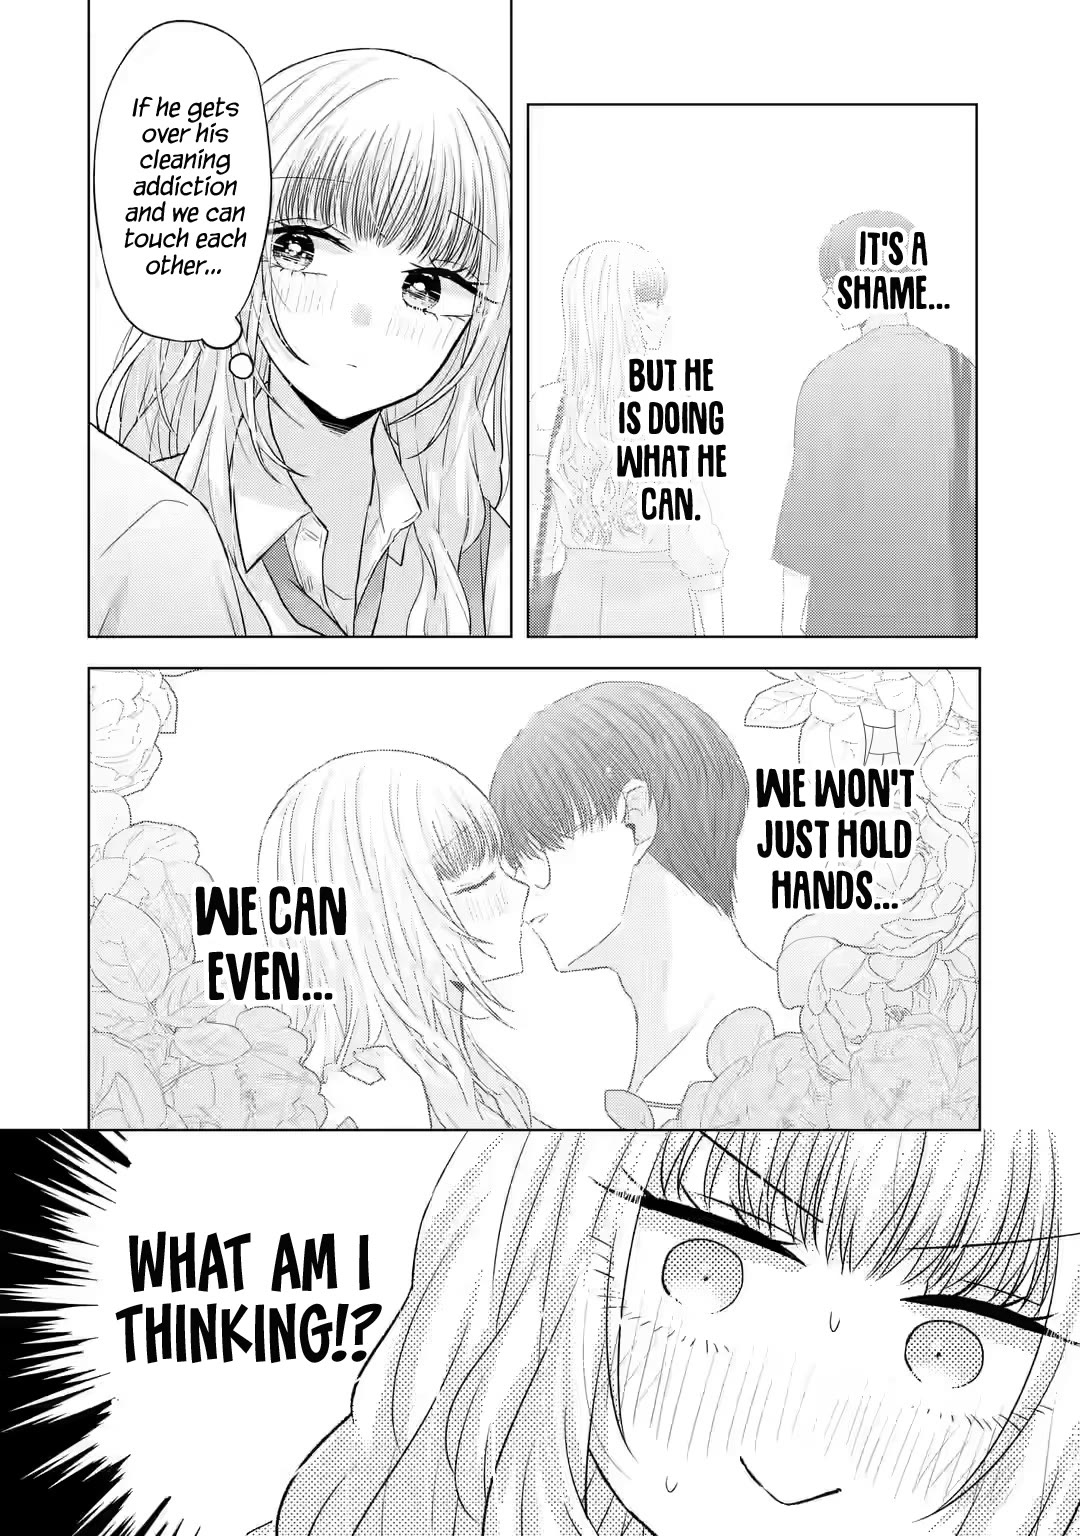 Nanjou-san Wants to Be Held by Me - chapter 7 - #3